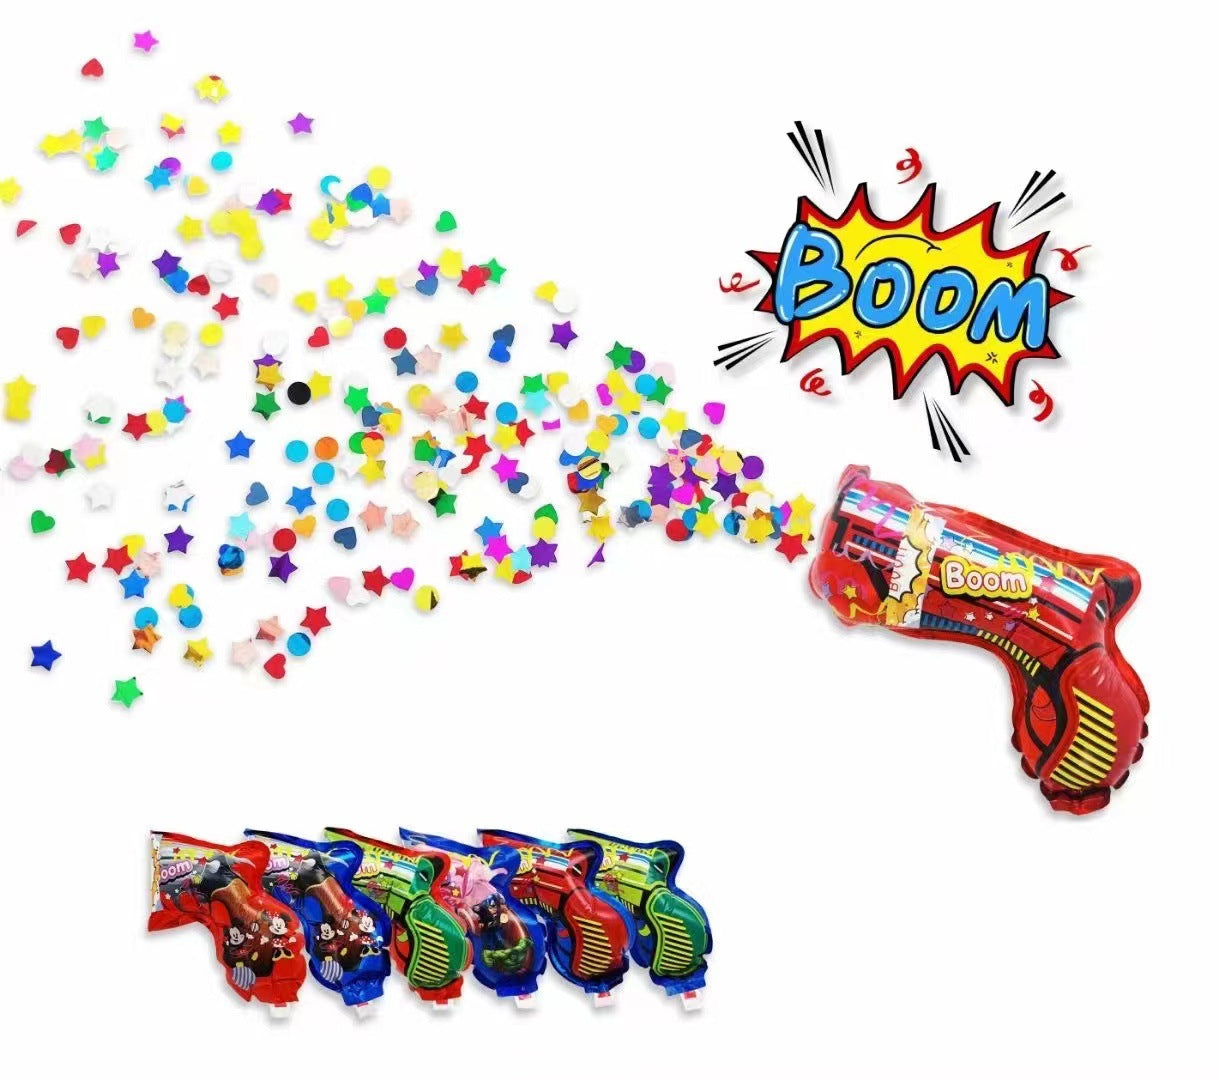 Automatic Inflatable Spray Balloon Hand Held Salute Fireworks Party Toys Confetti Holiday Atmosphere Birthday Wedding Balloon